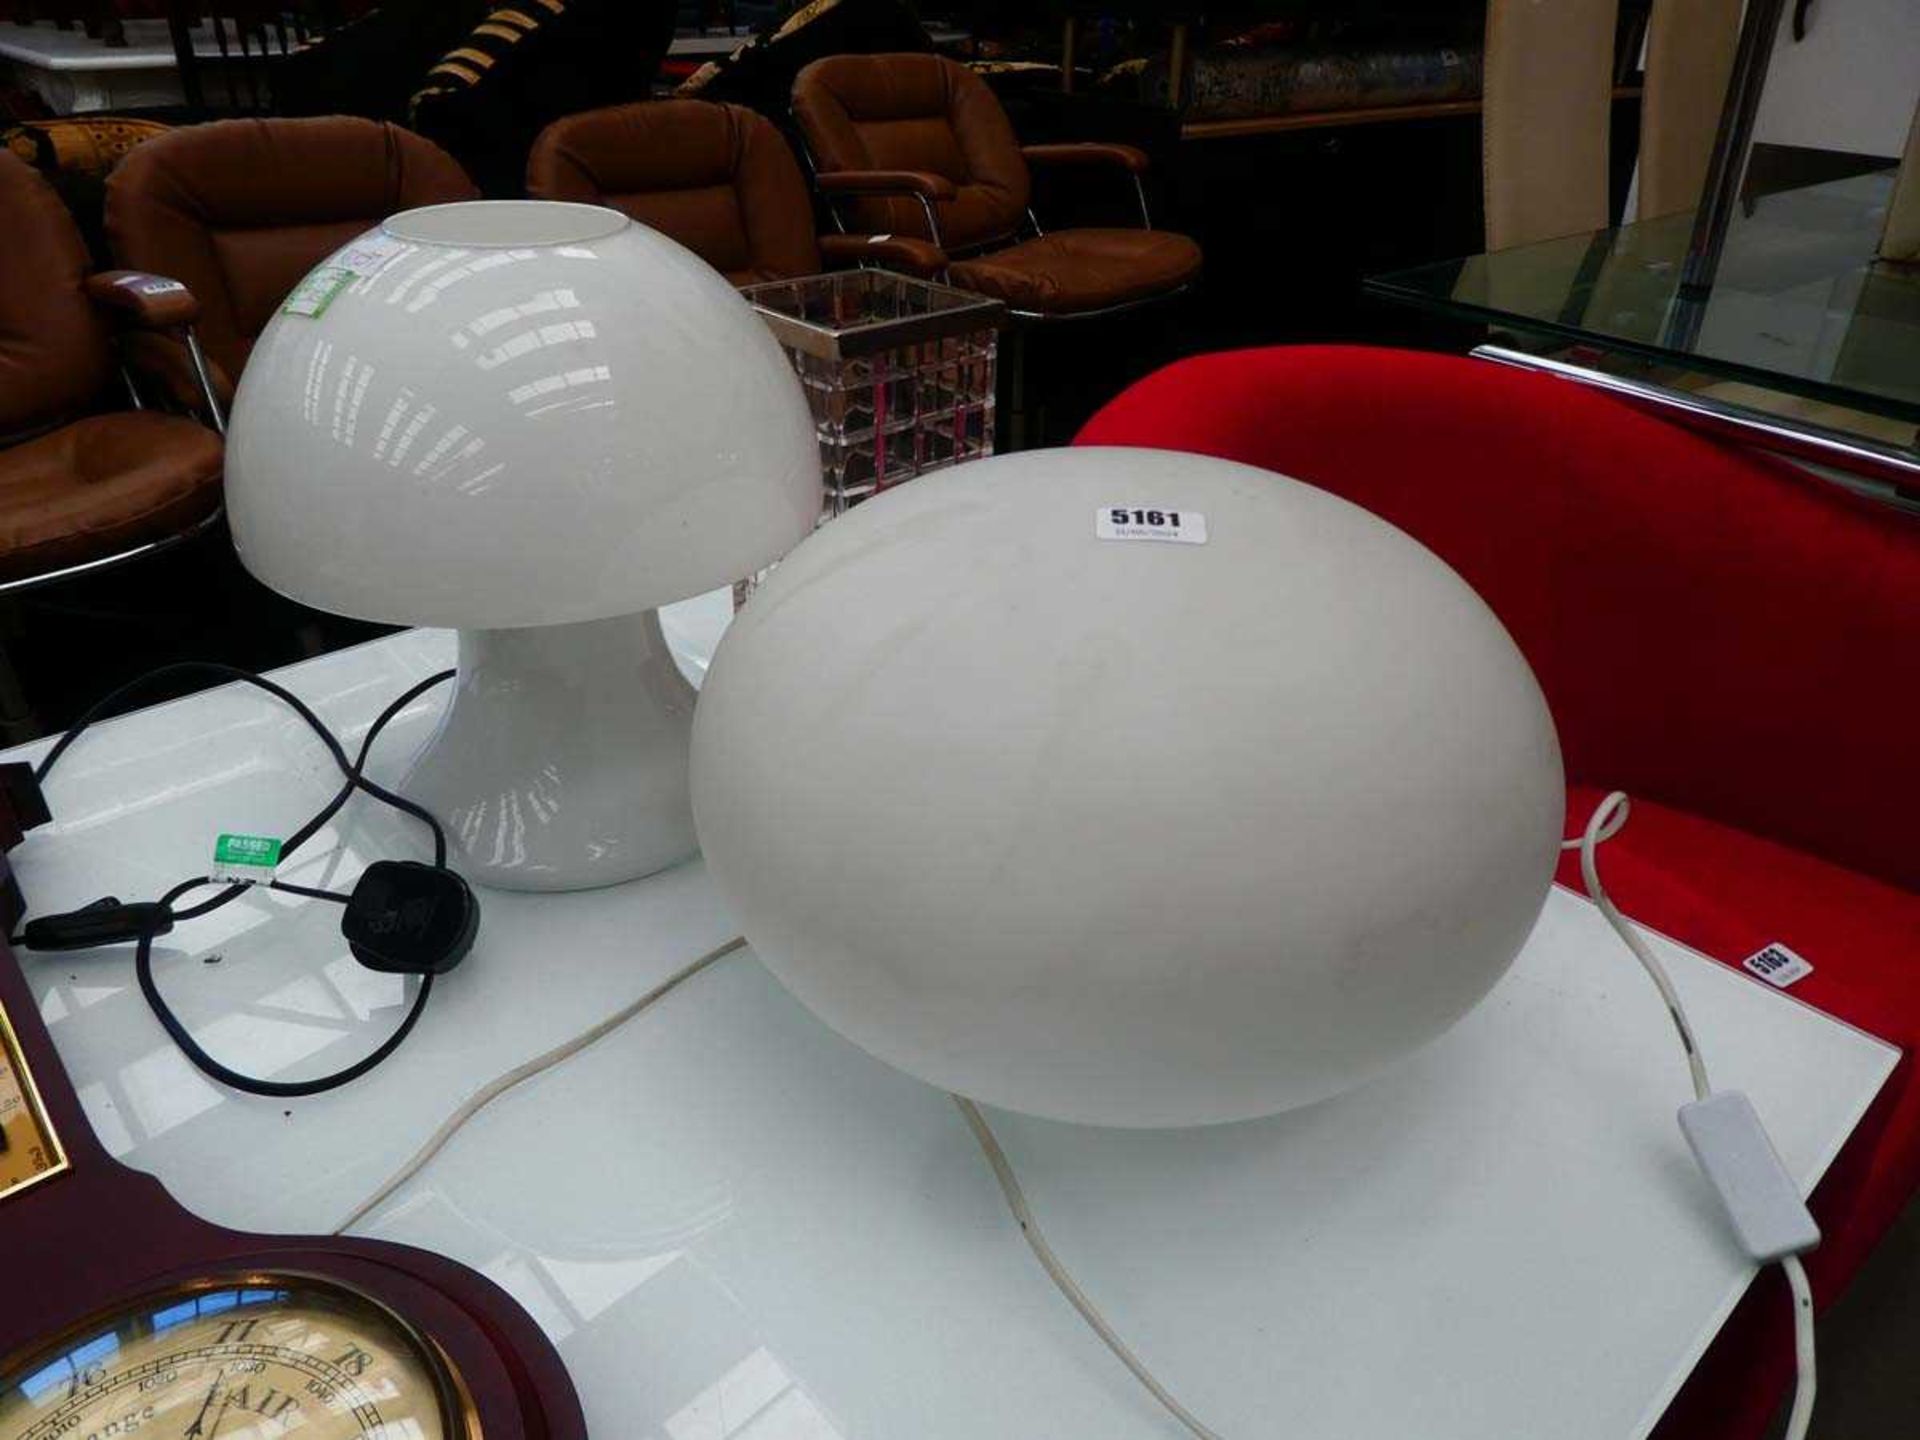 Three various table lamps